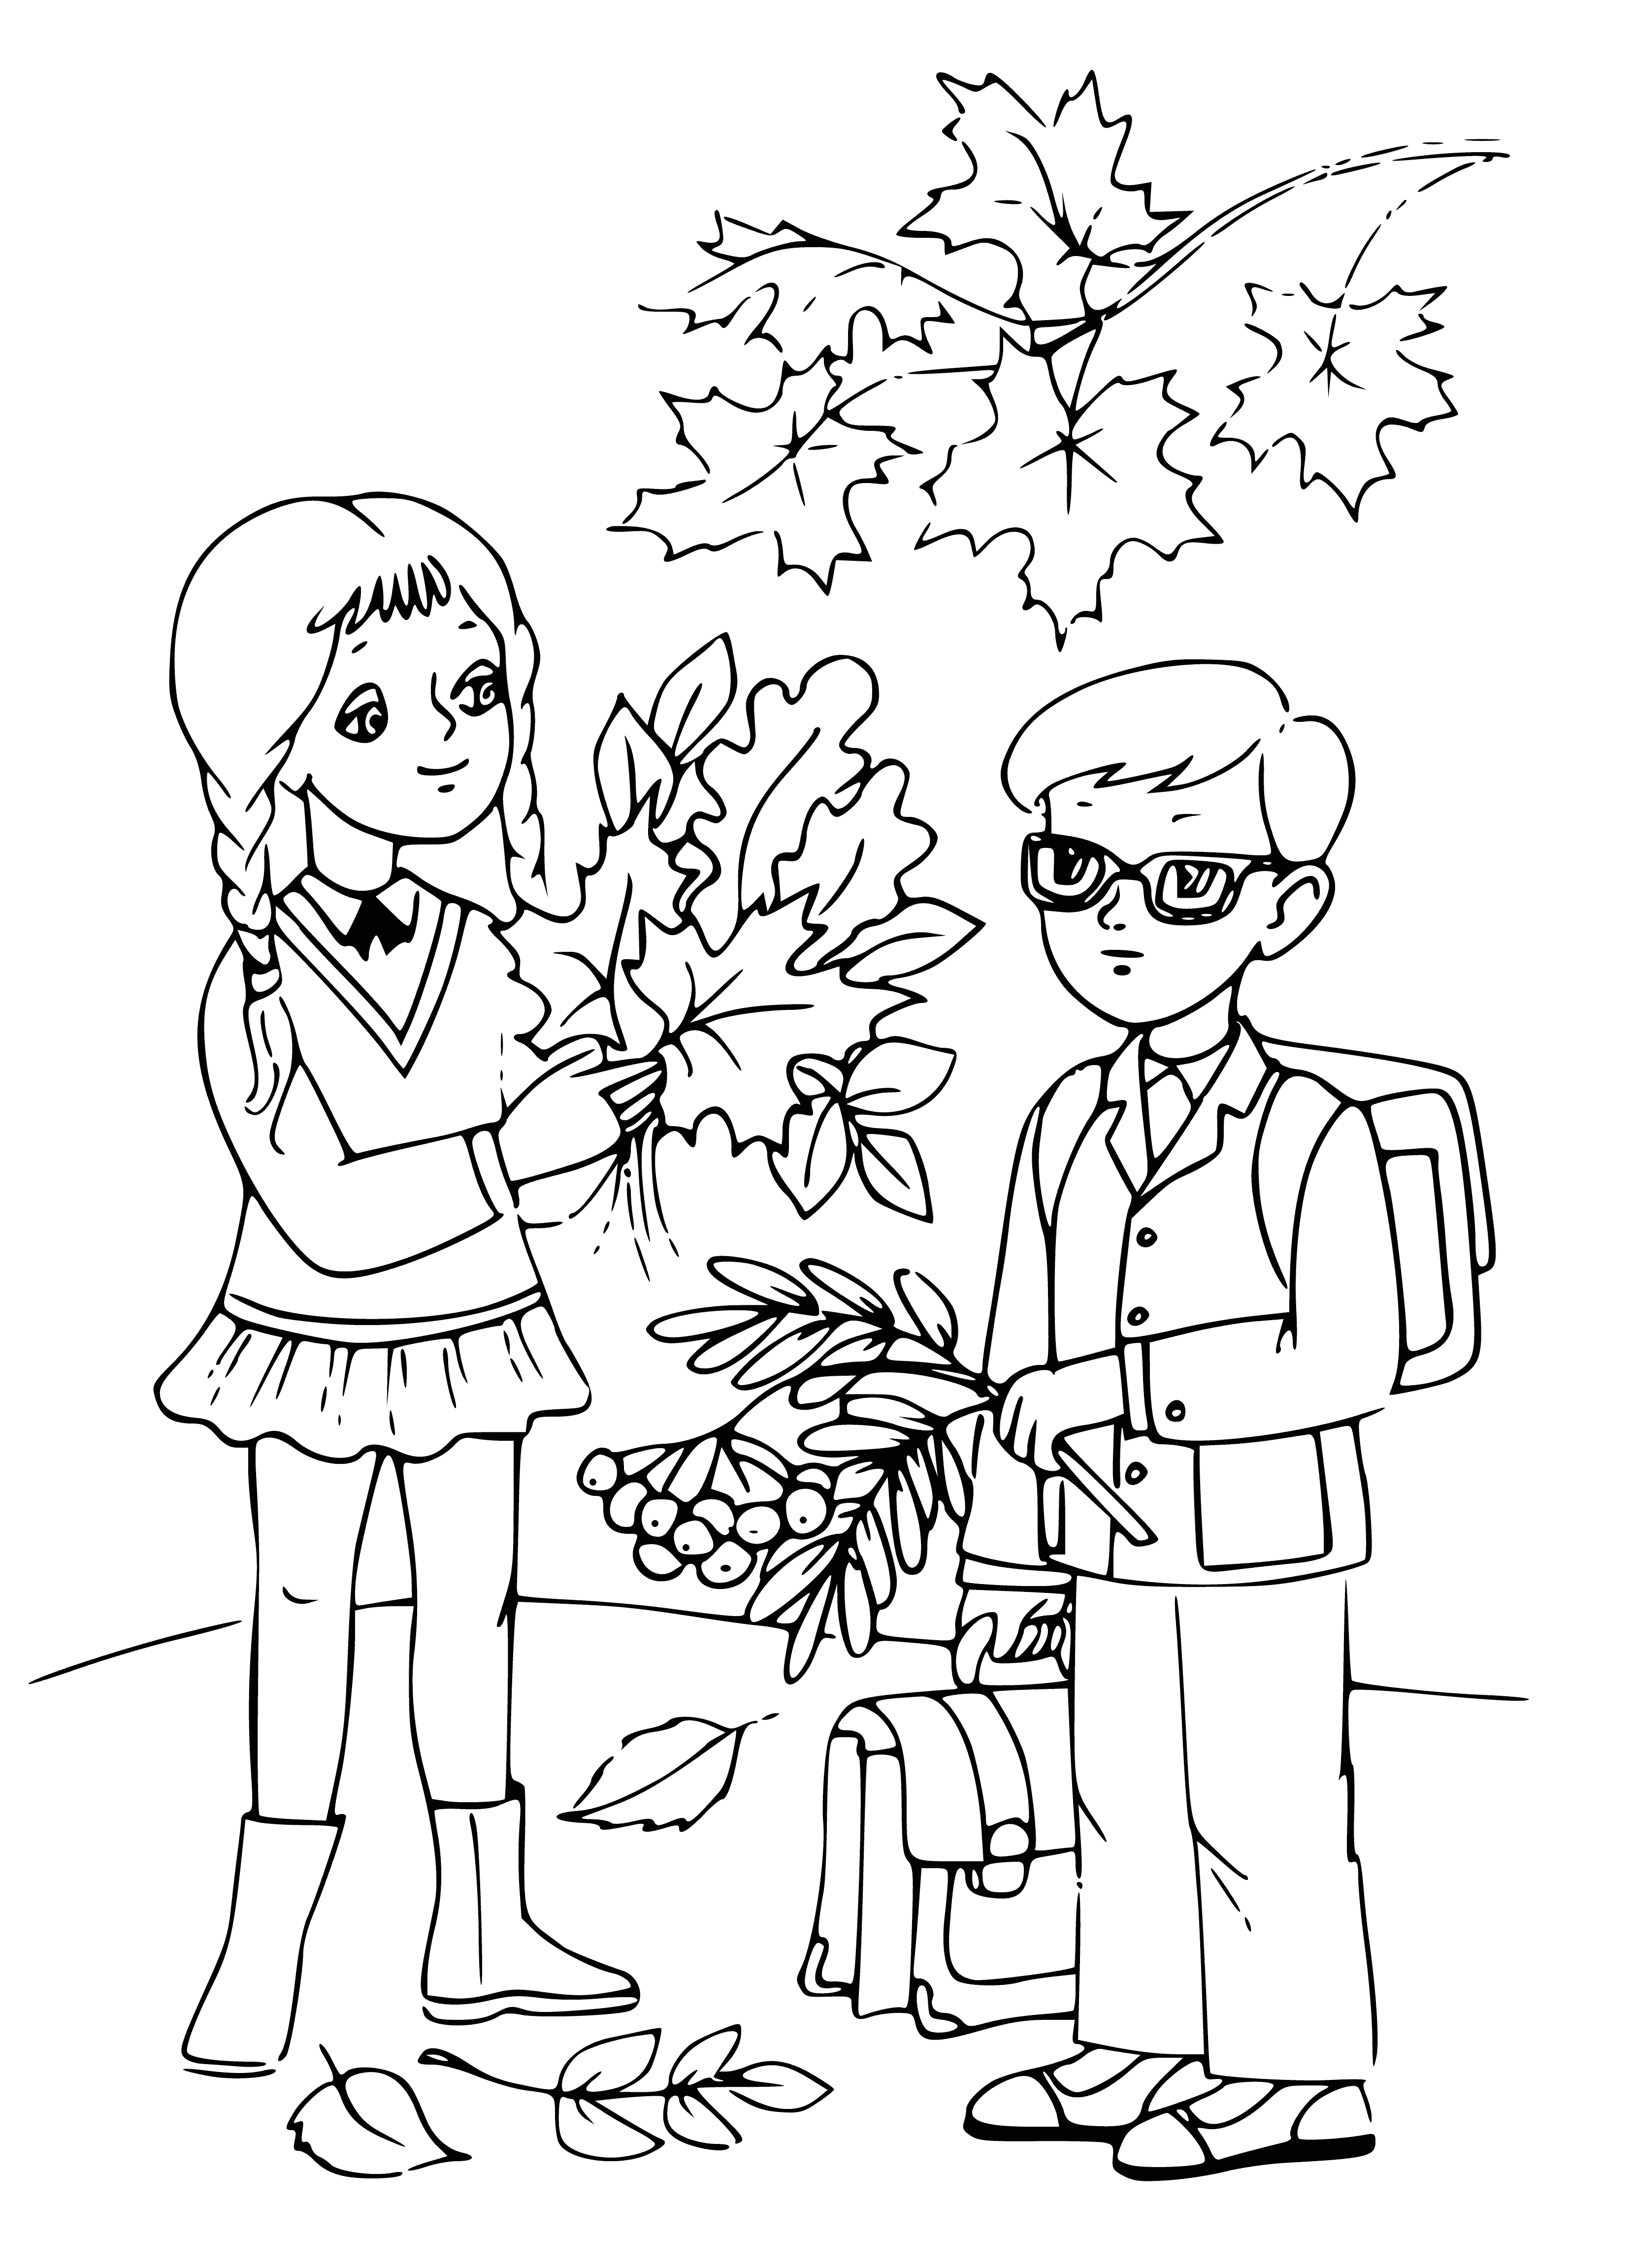 1 September coloring page